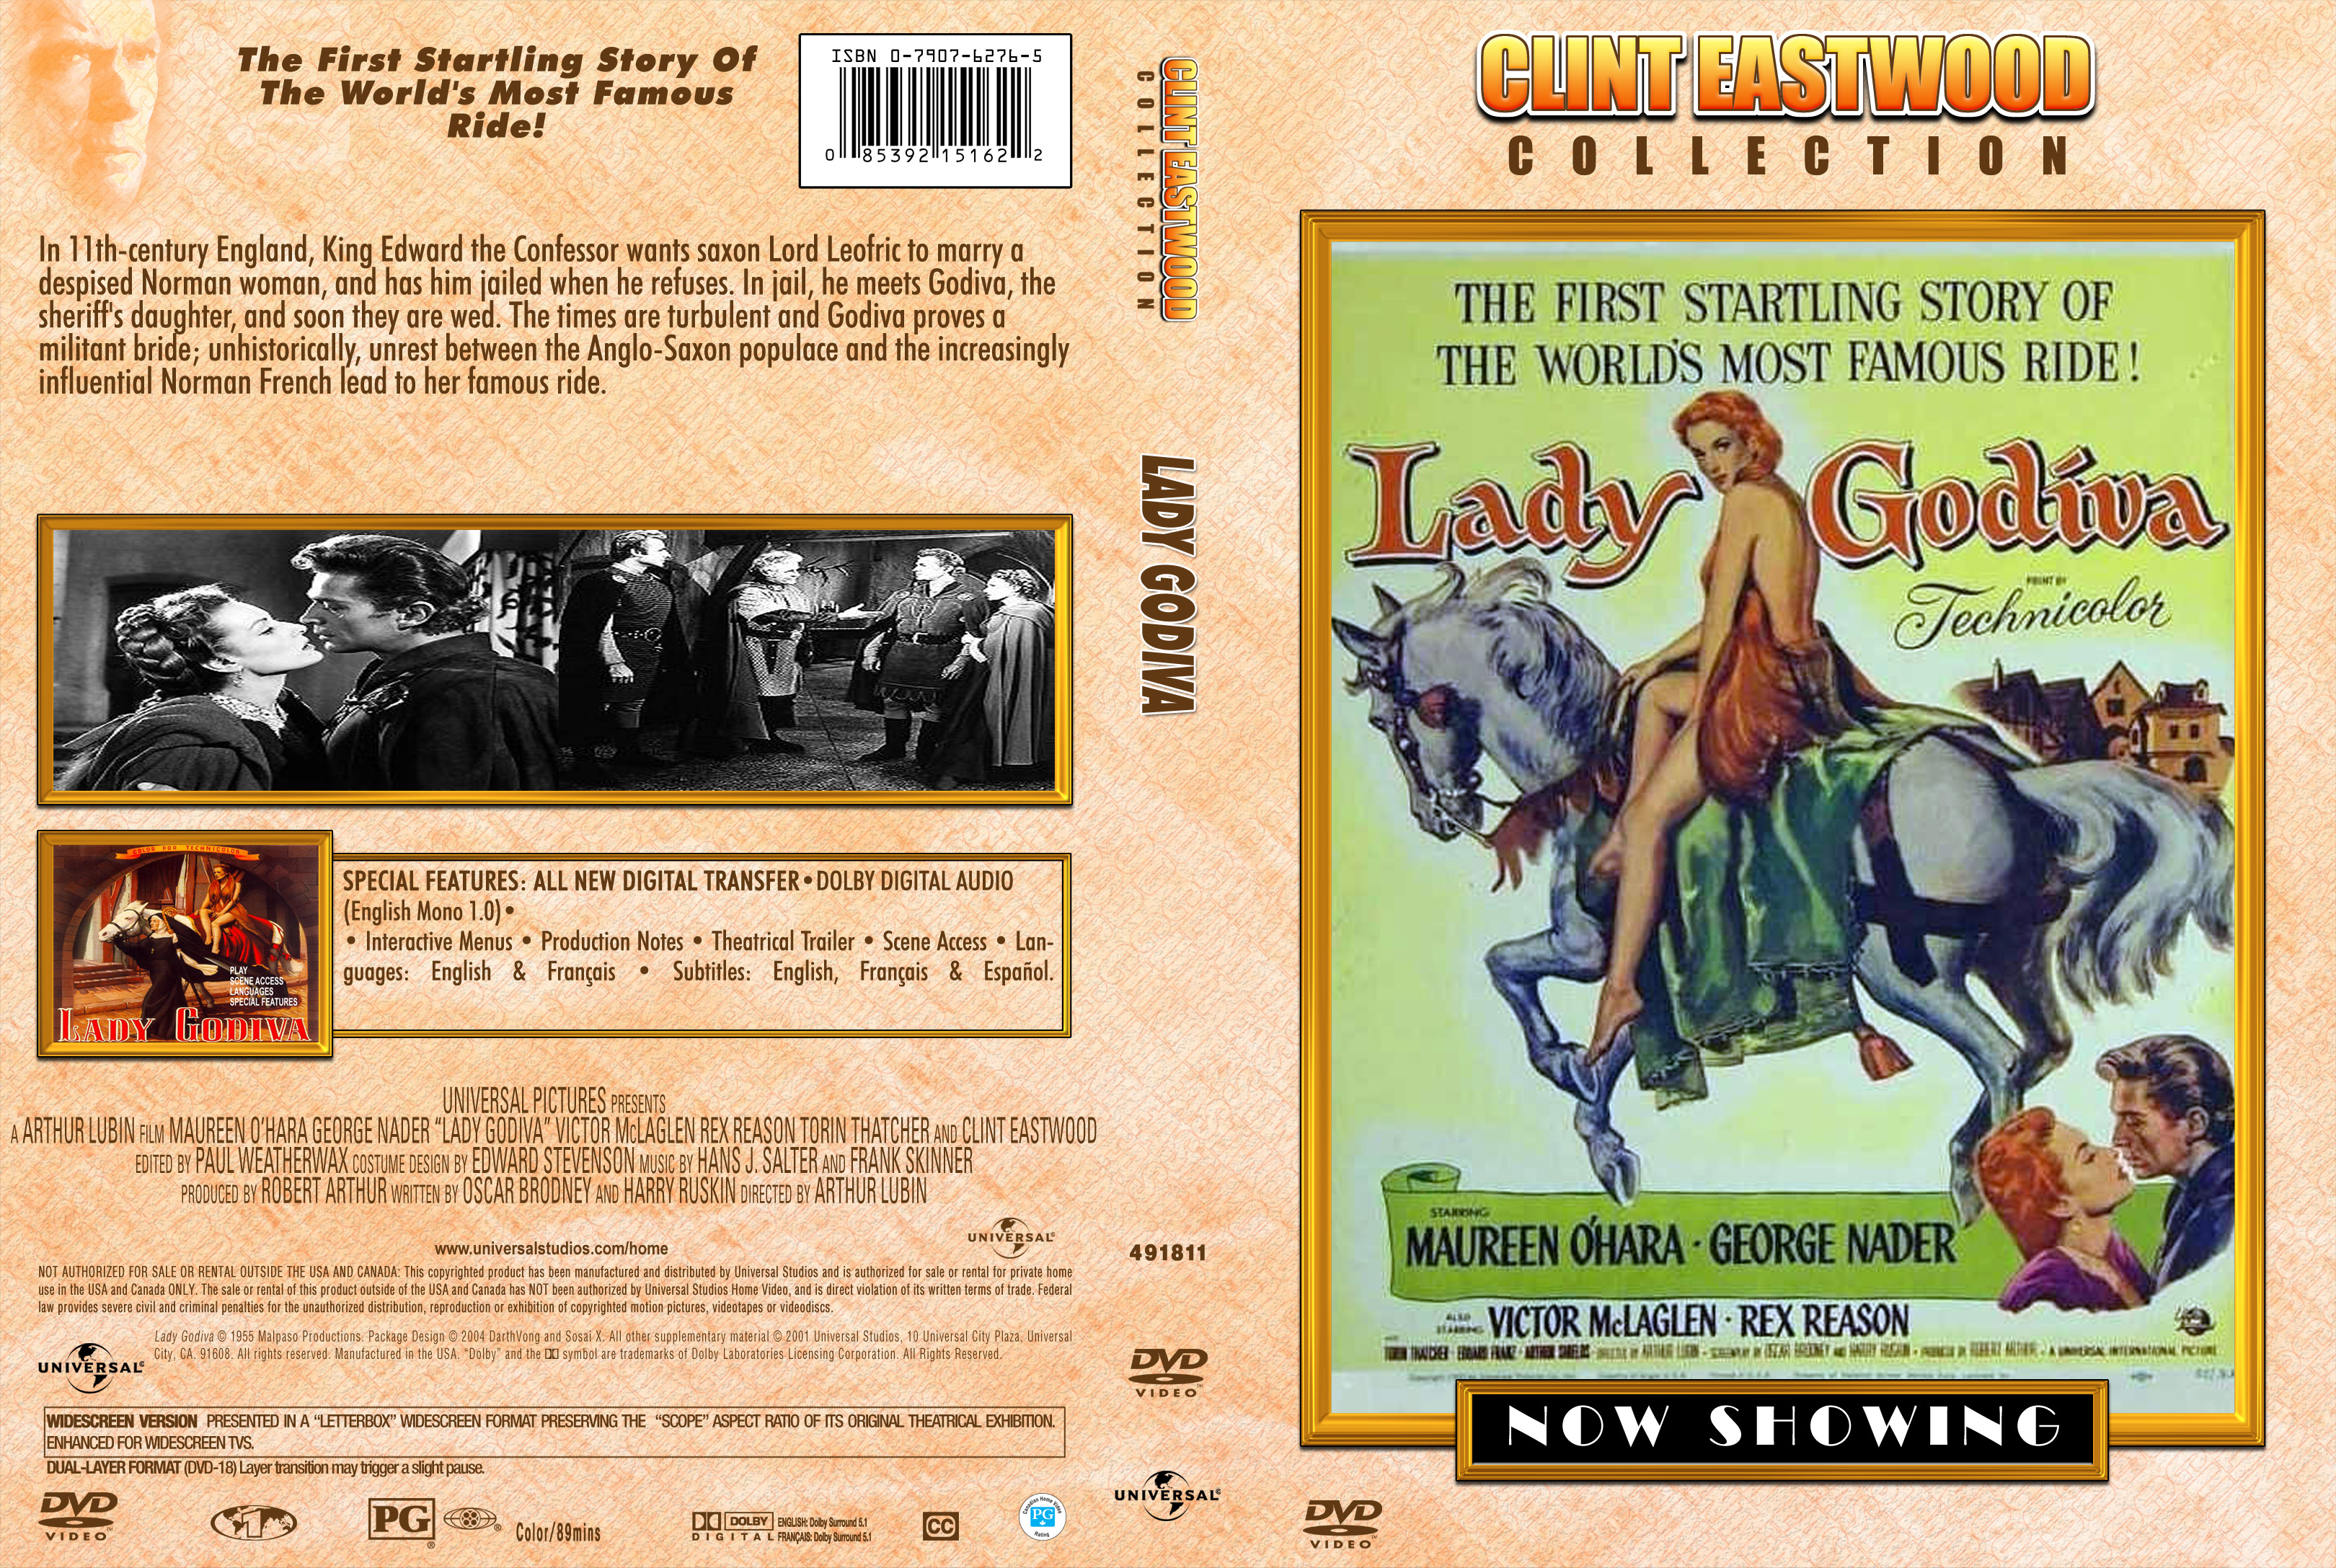 Clint Eastwood Collection - Lady Godiva